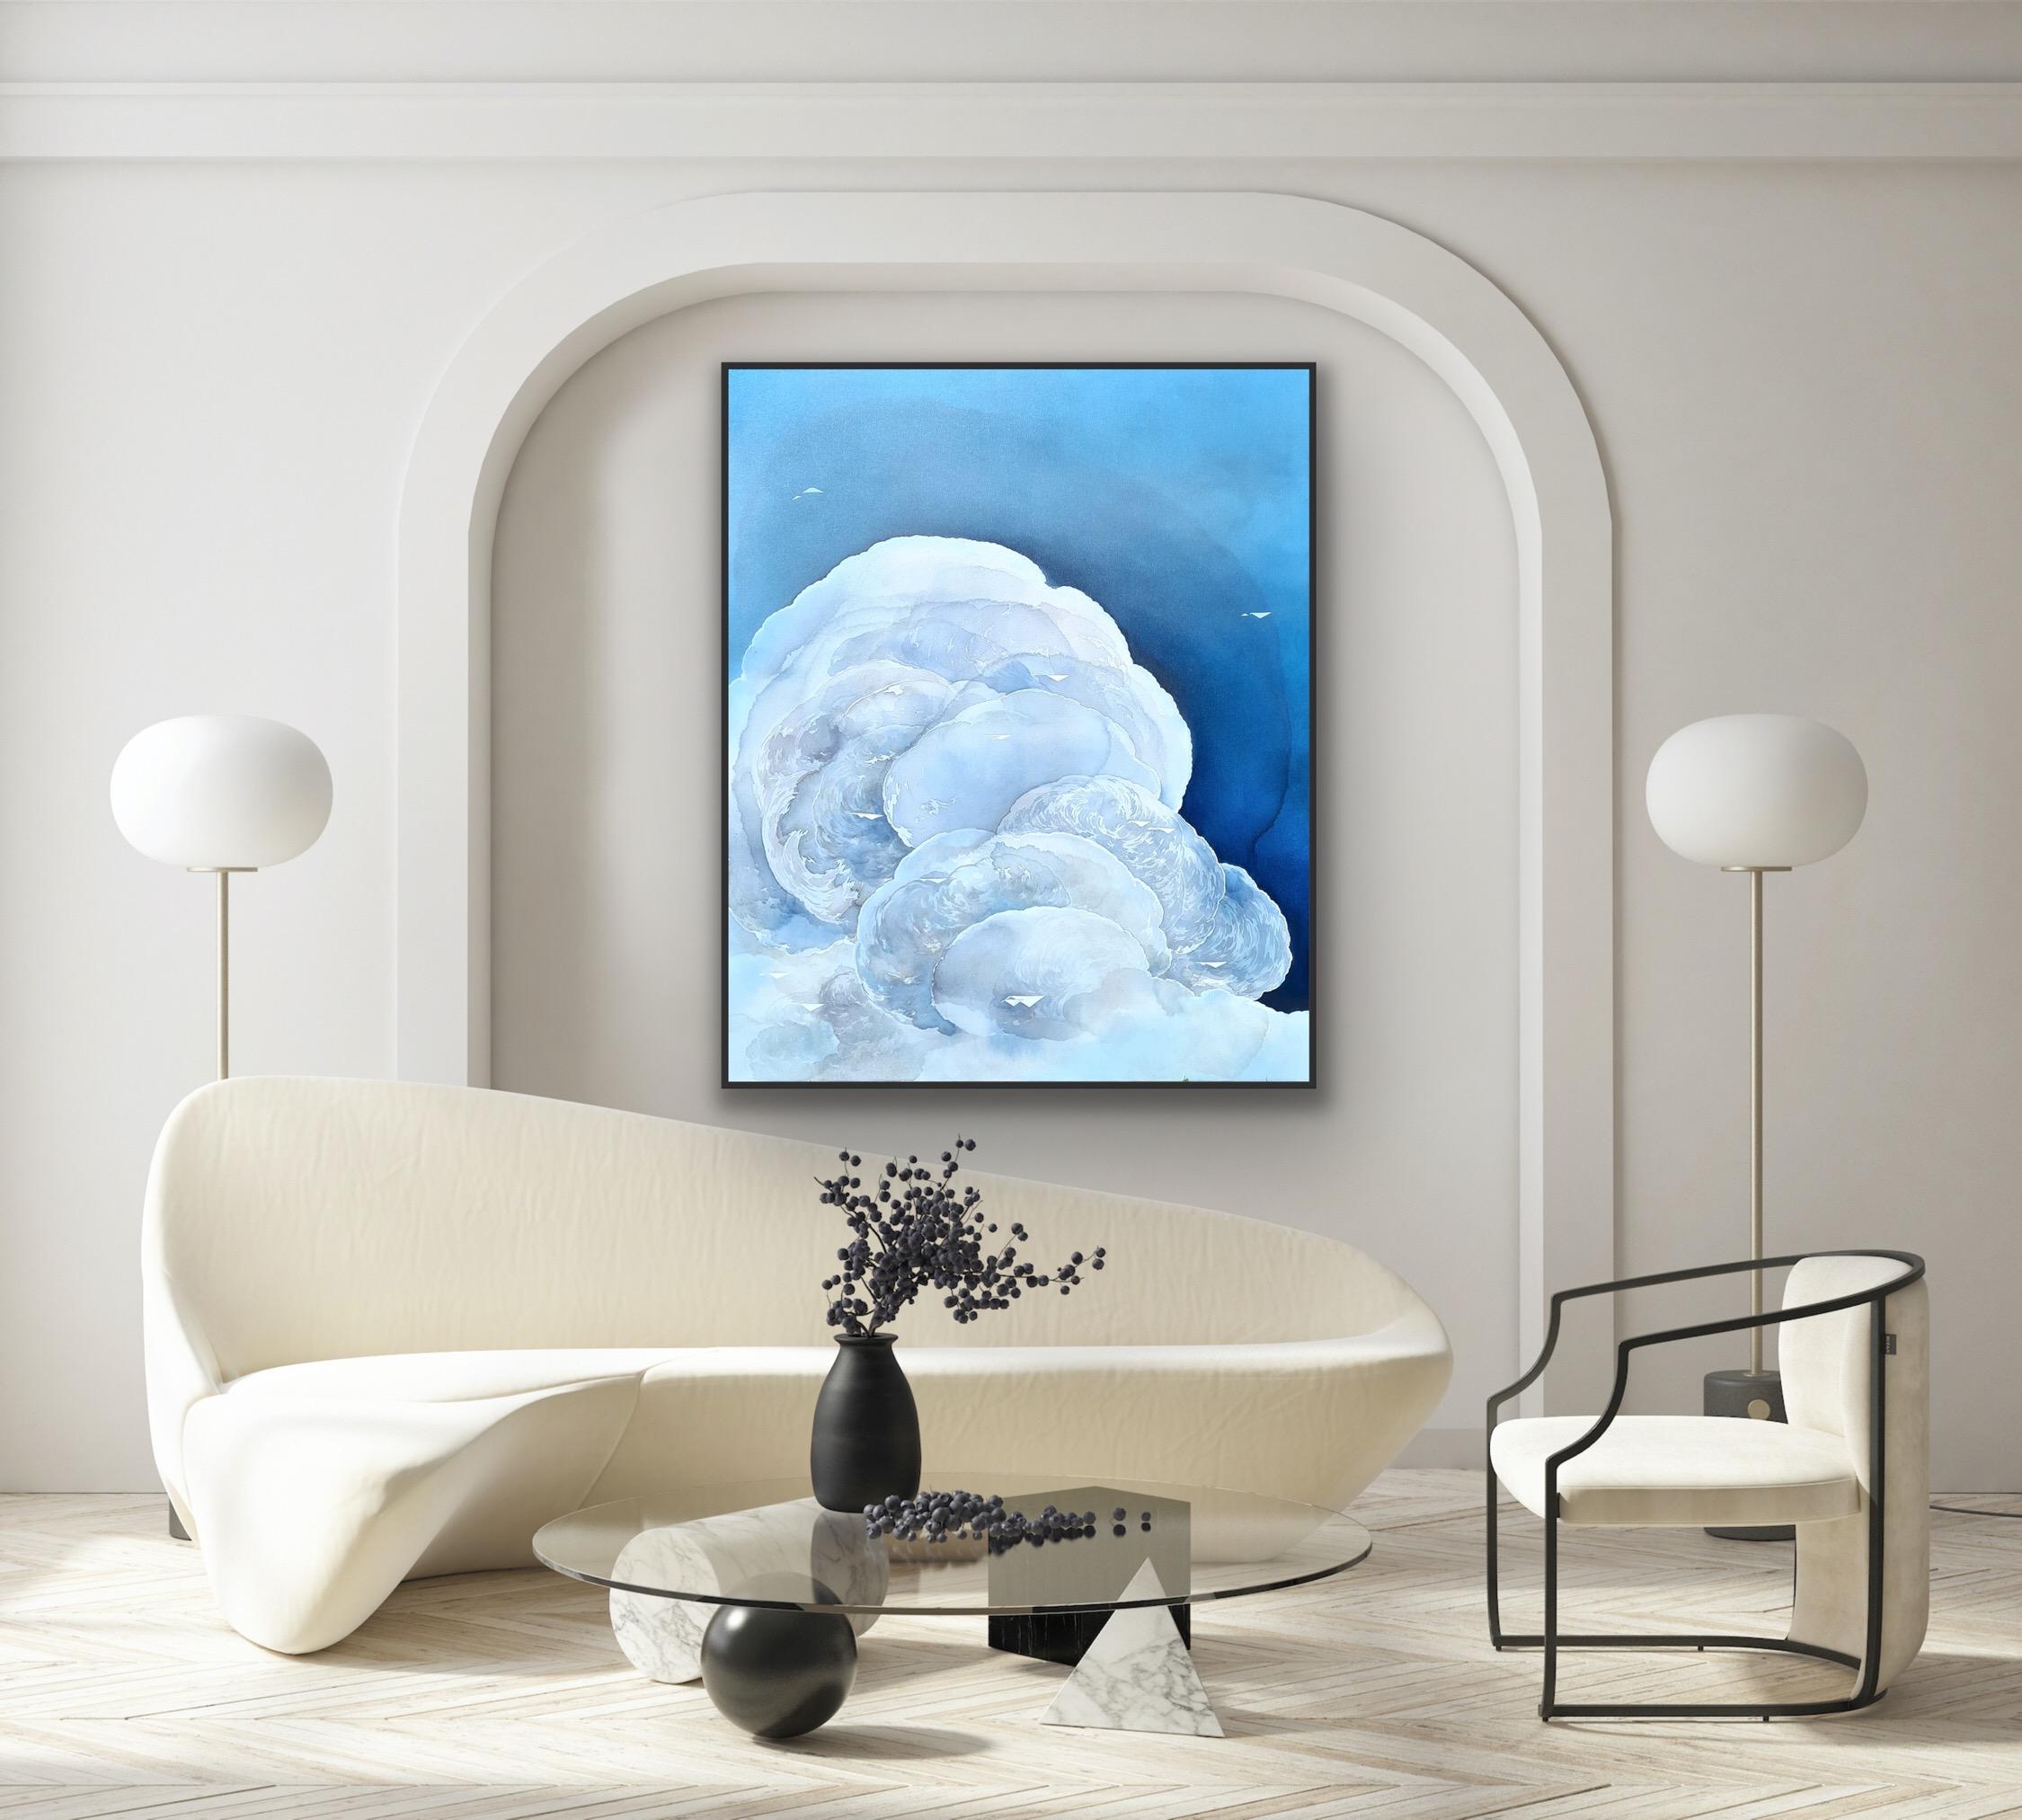 Migration: Voyager, Original painting, Landscape, Abstract, Clouds, Blue, Planes - Painting by Yuliya Martynova